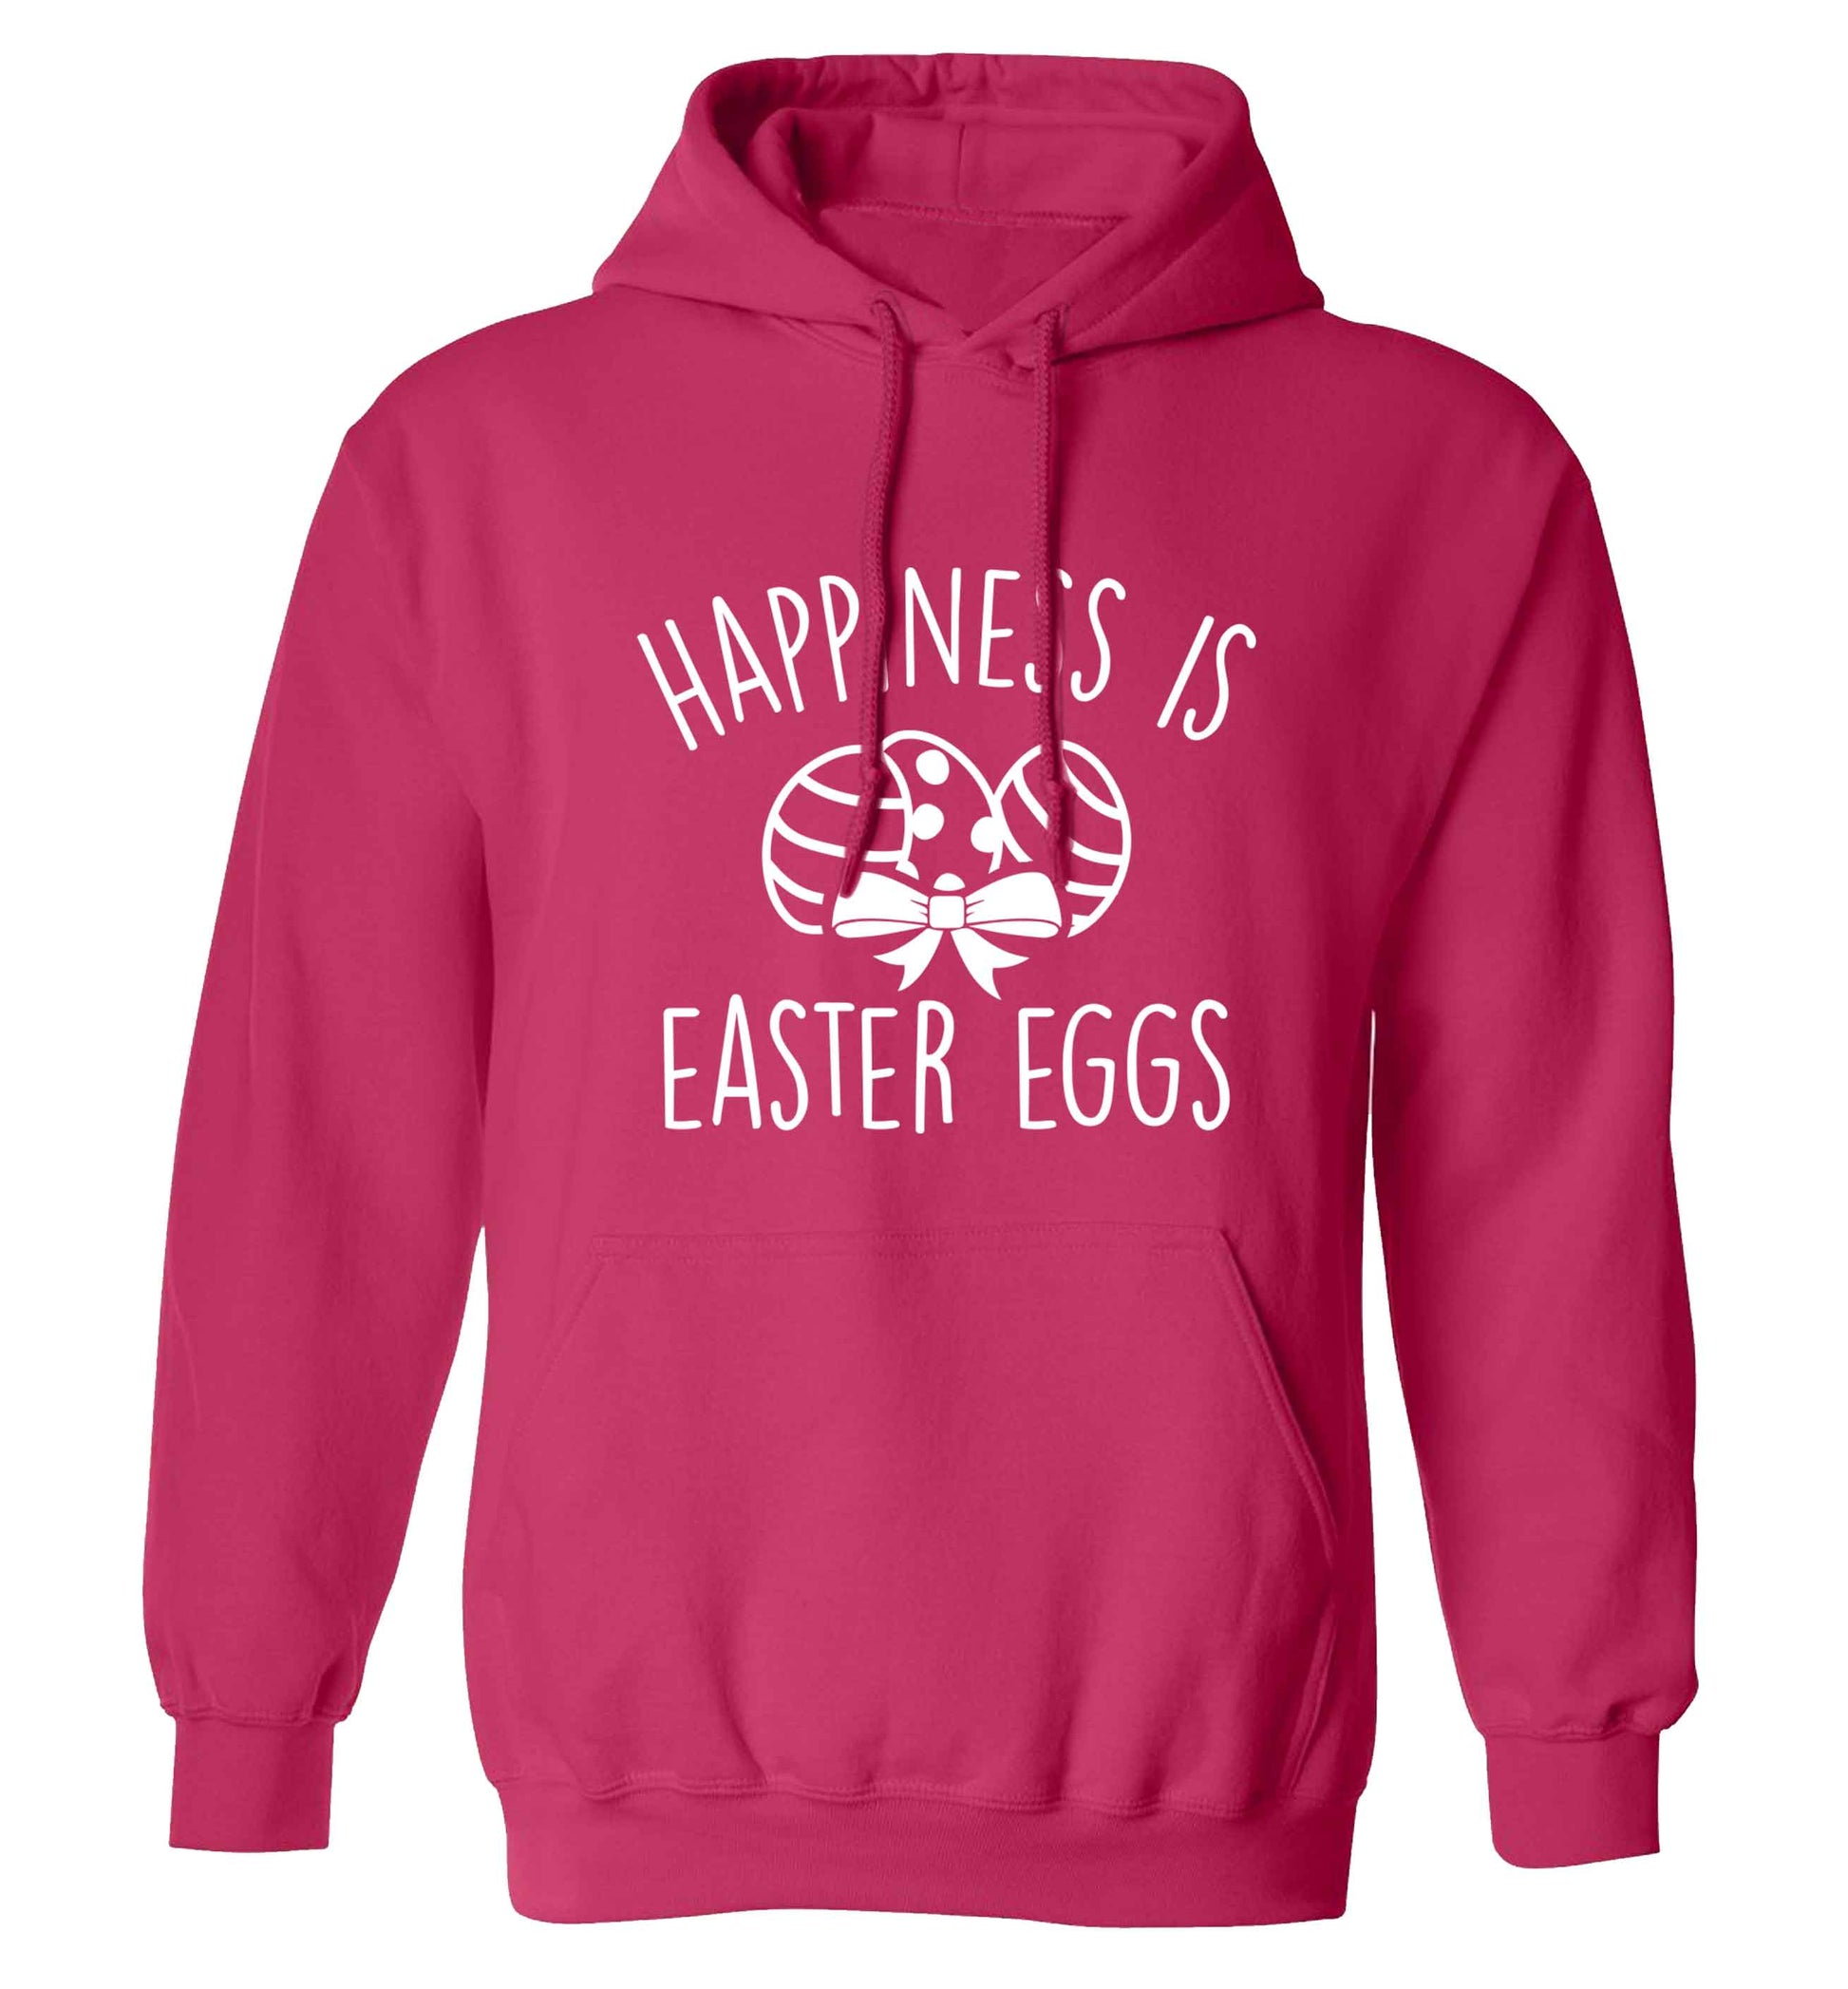 Happiness is Easter eggs adults unisex pink hoodie 2XL